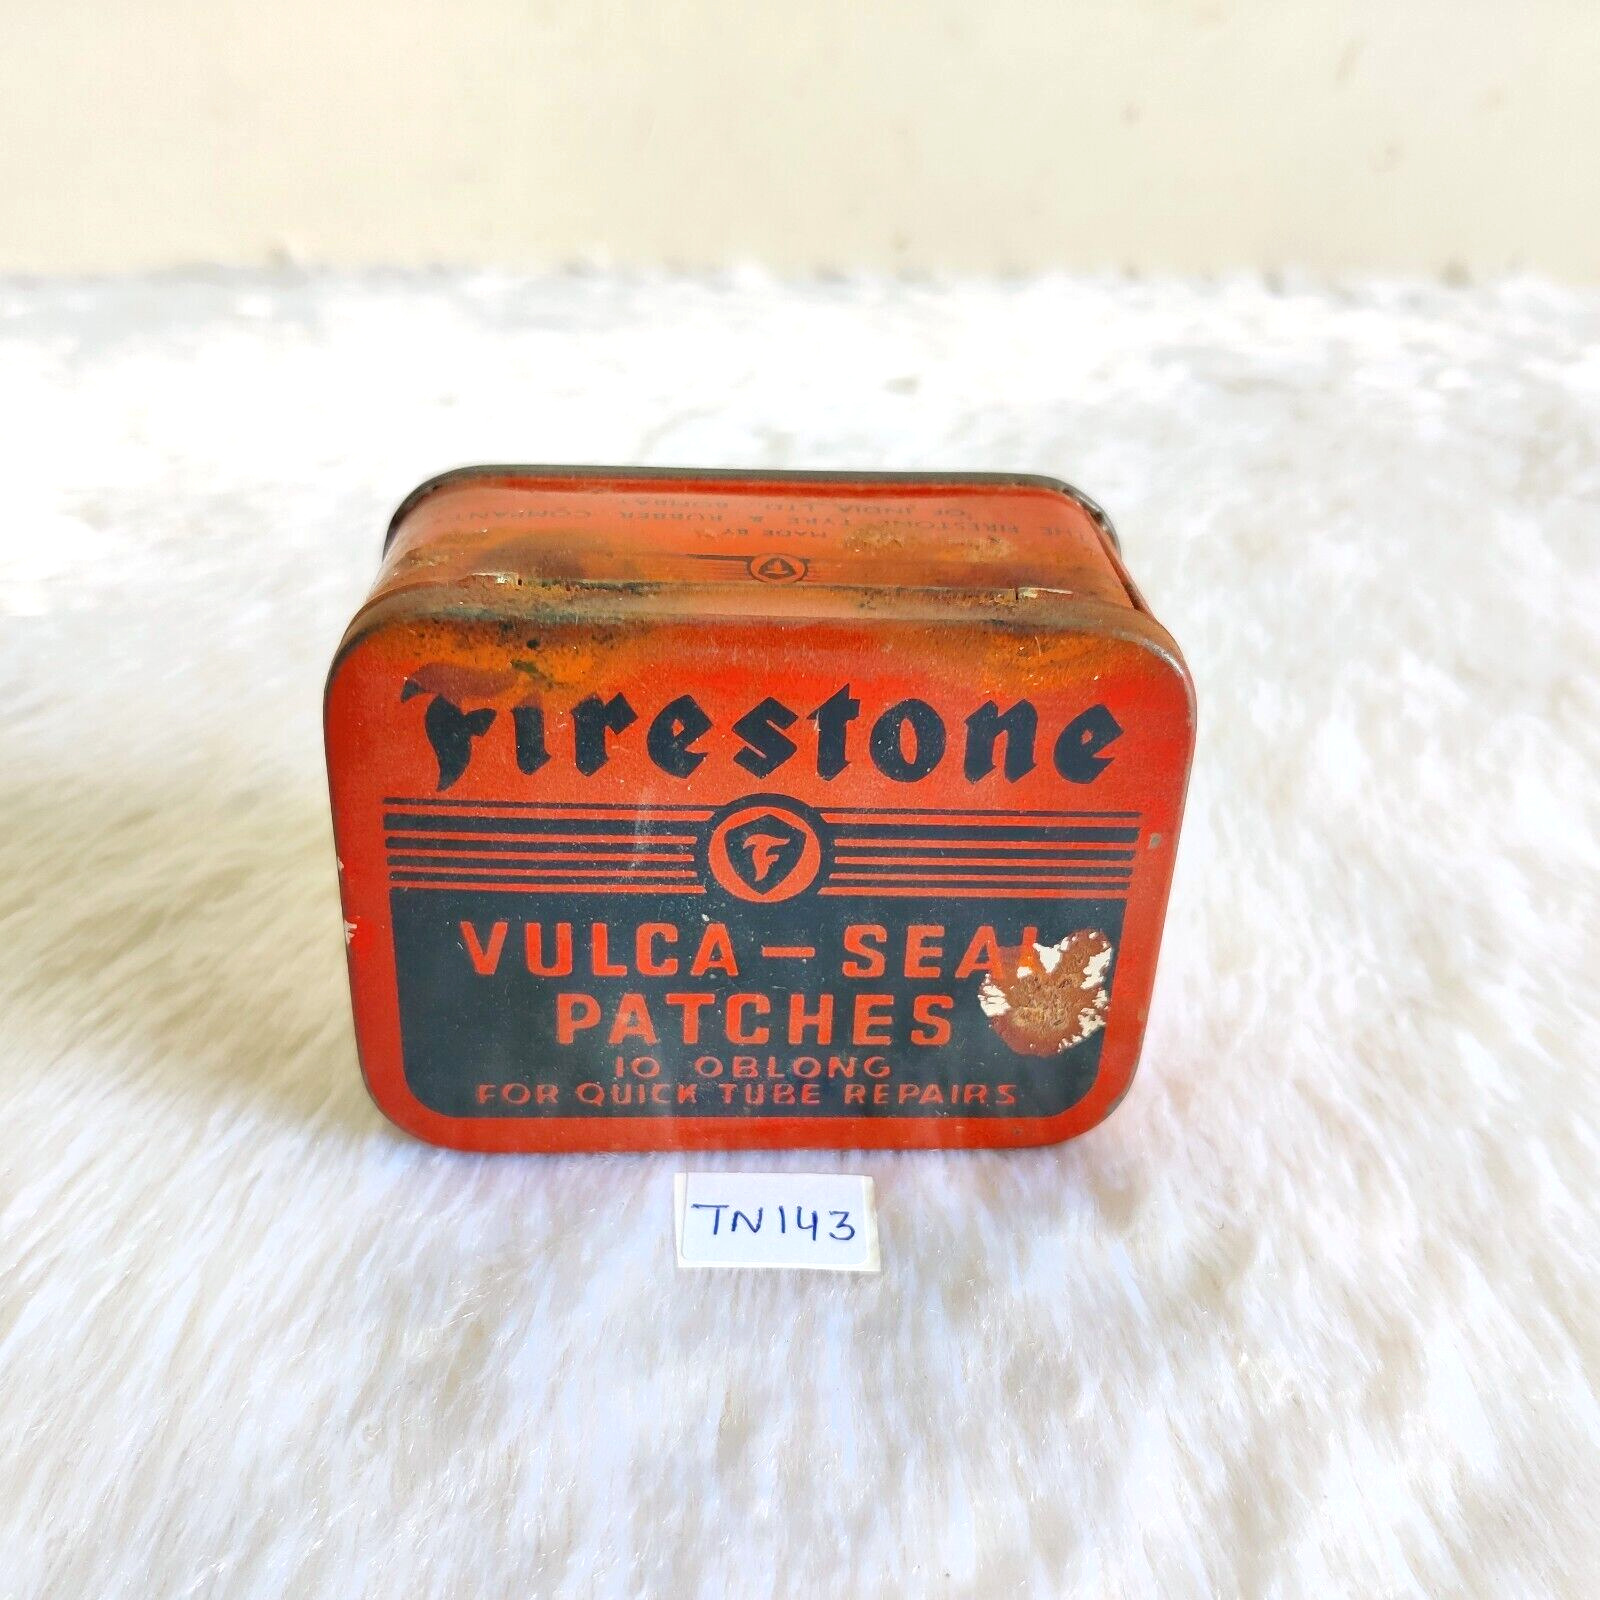 Vintage Firestone Vulca Seal Patches Advertising Tin Unused Packed Rare TN143